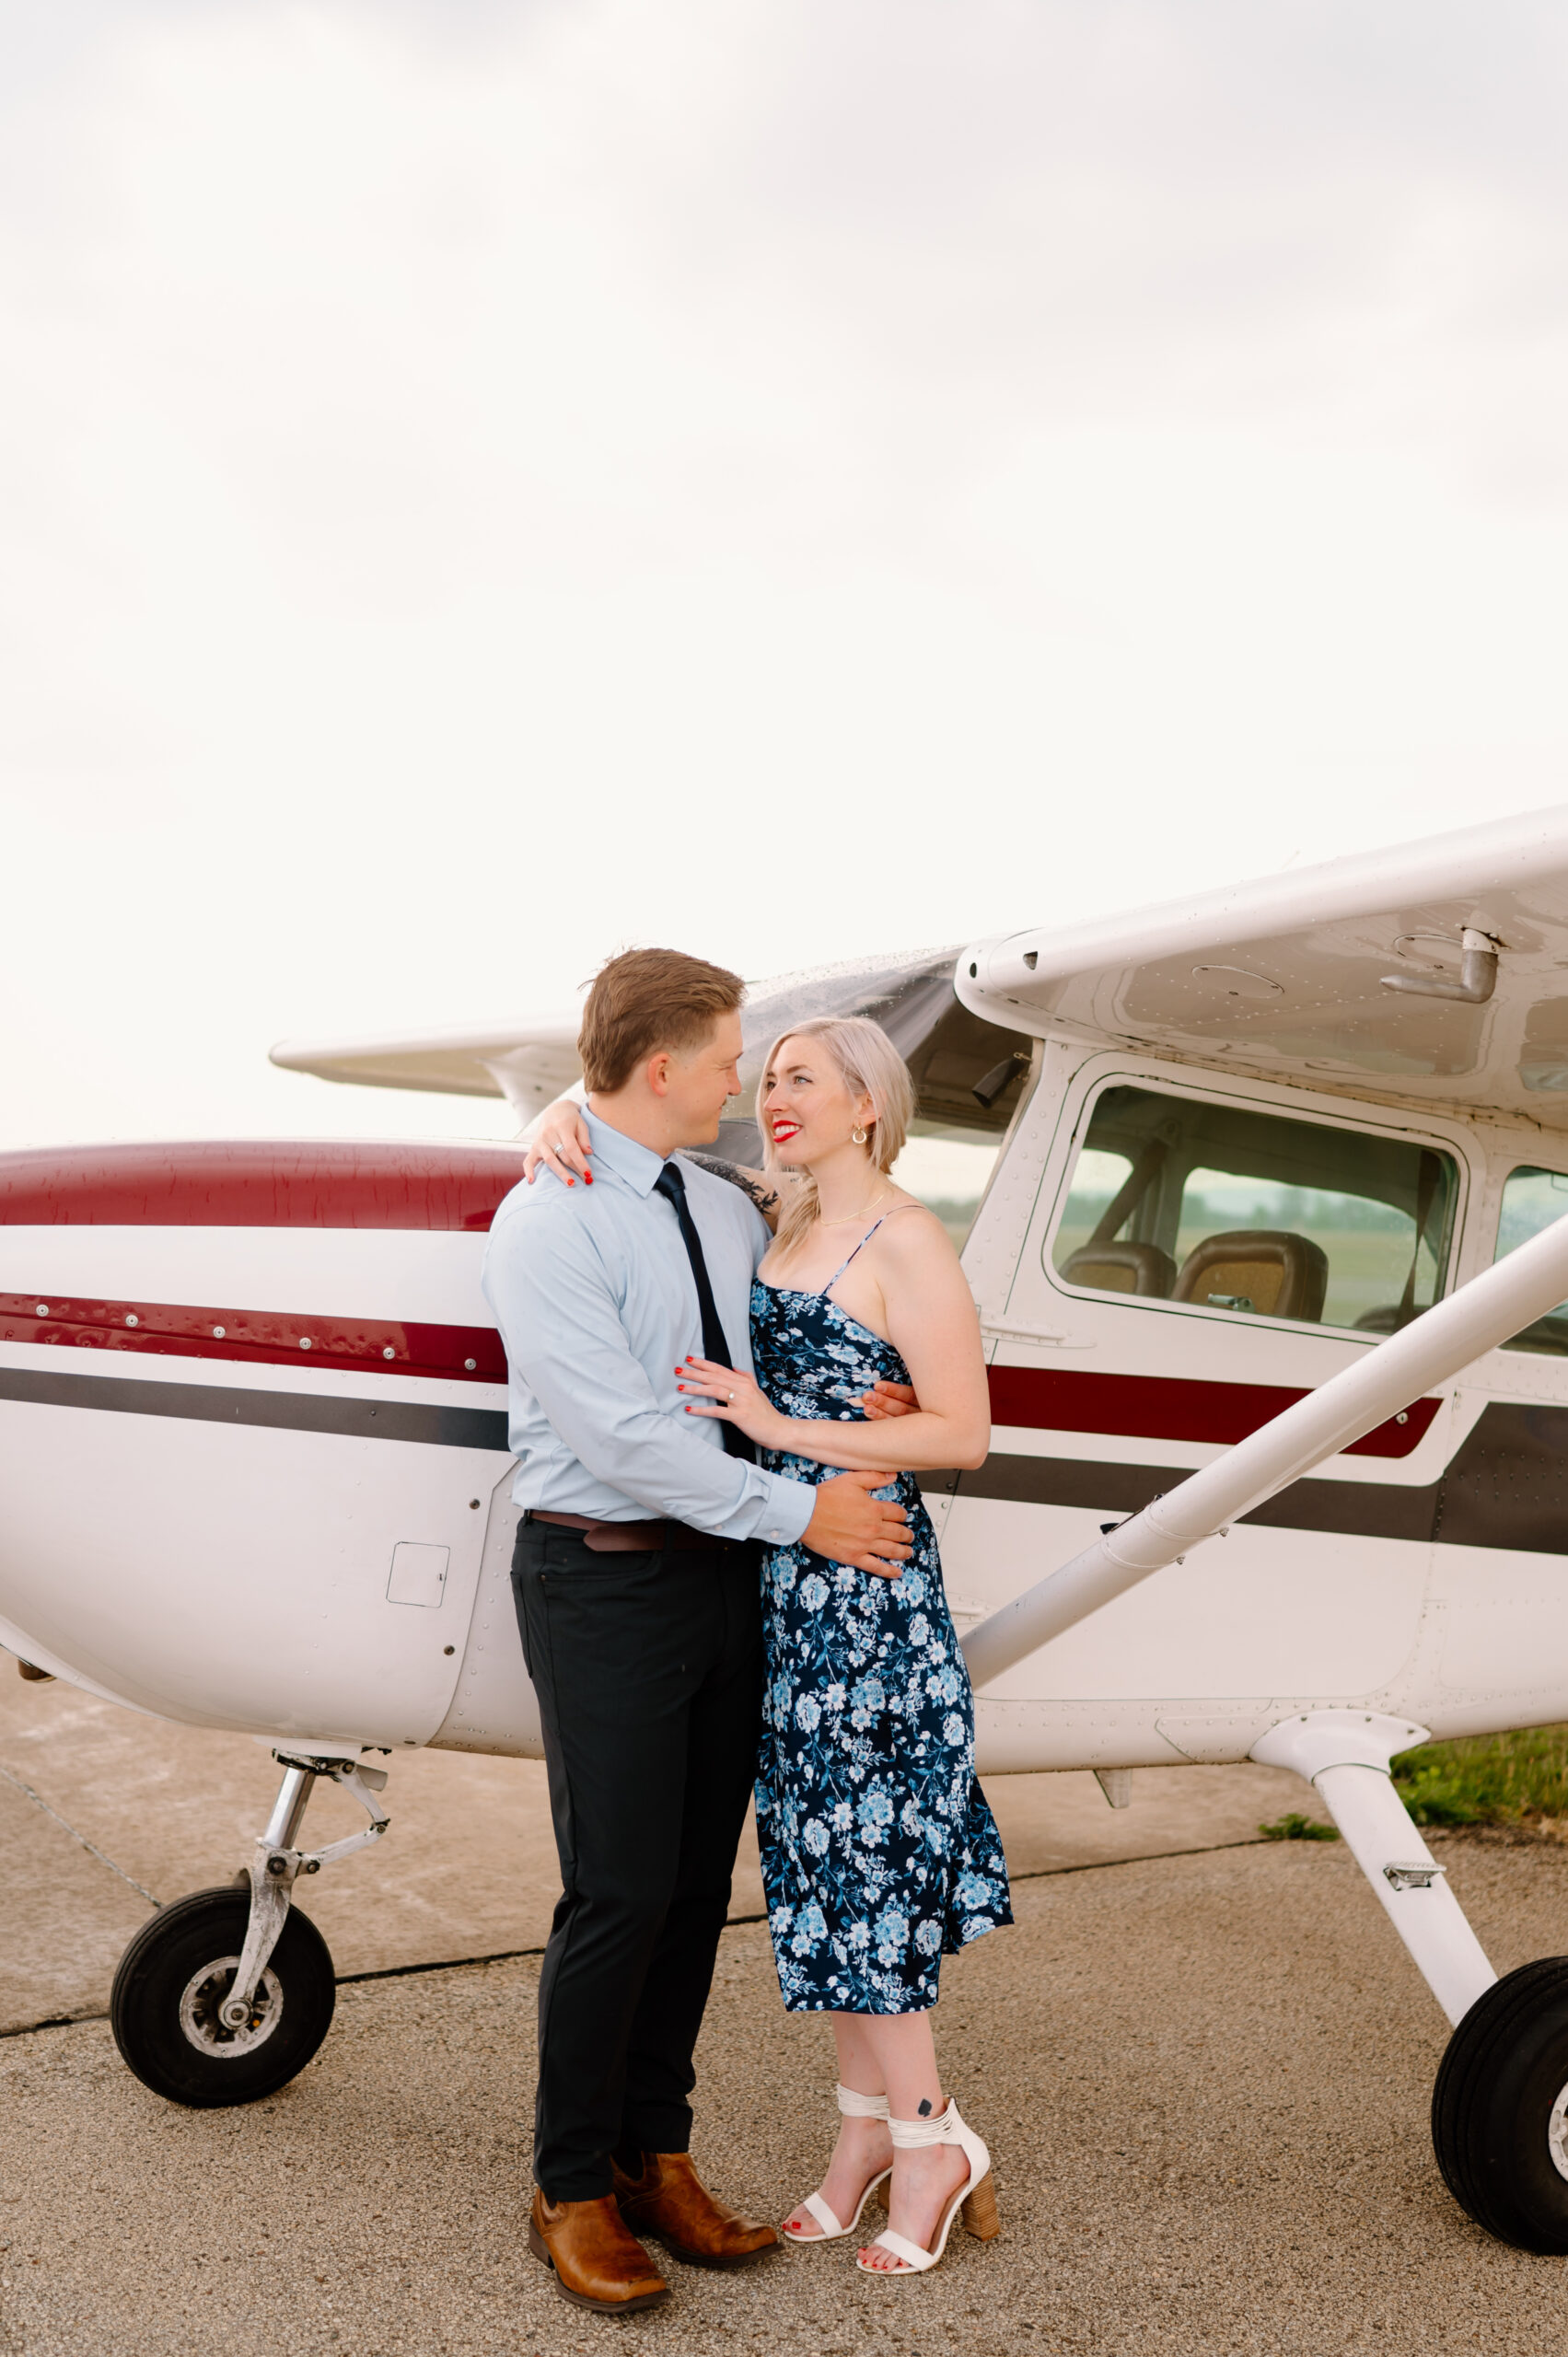 Unique engagement session of a couple with their arms wrapped around each other standing in front of their single engine plane.